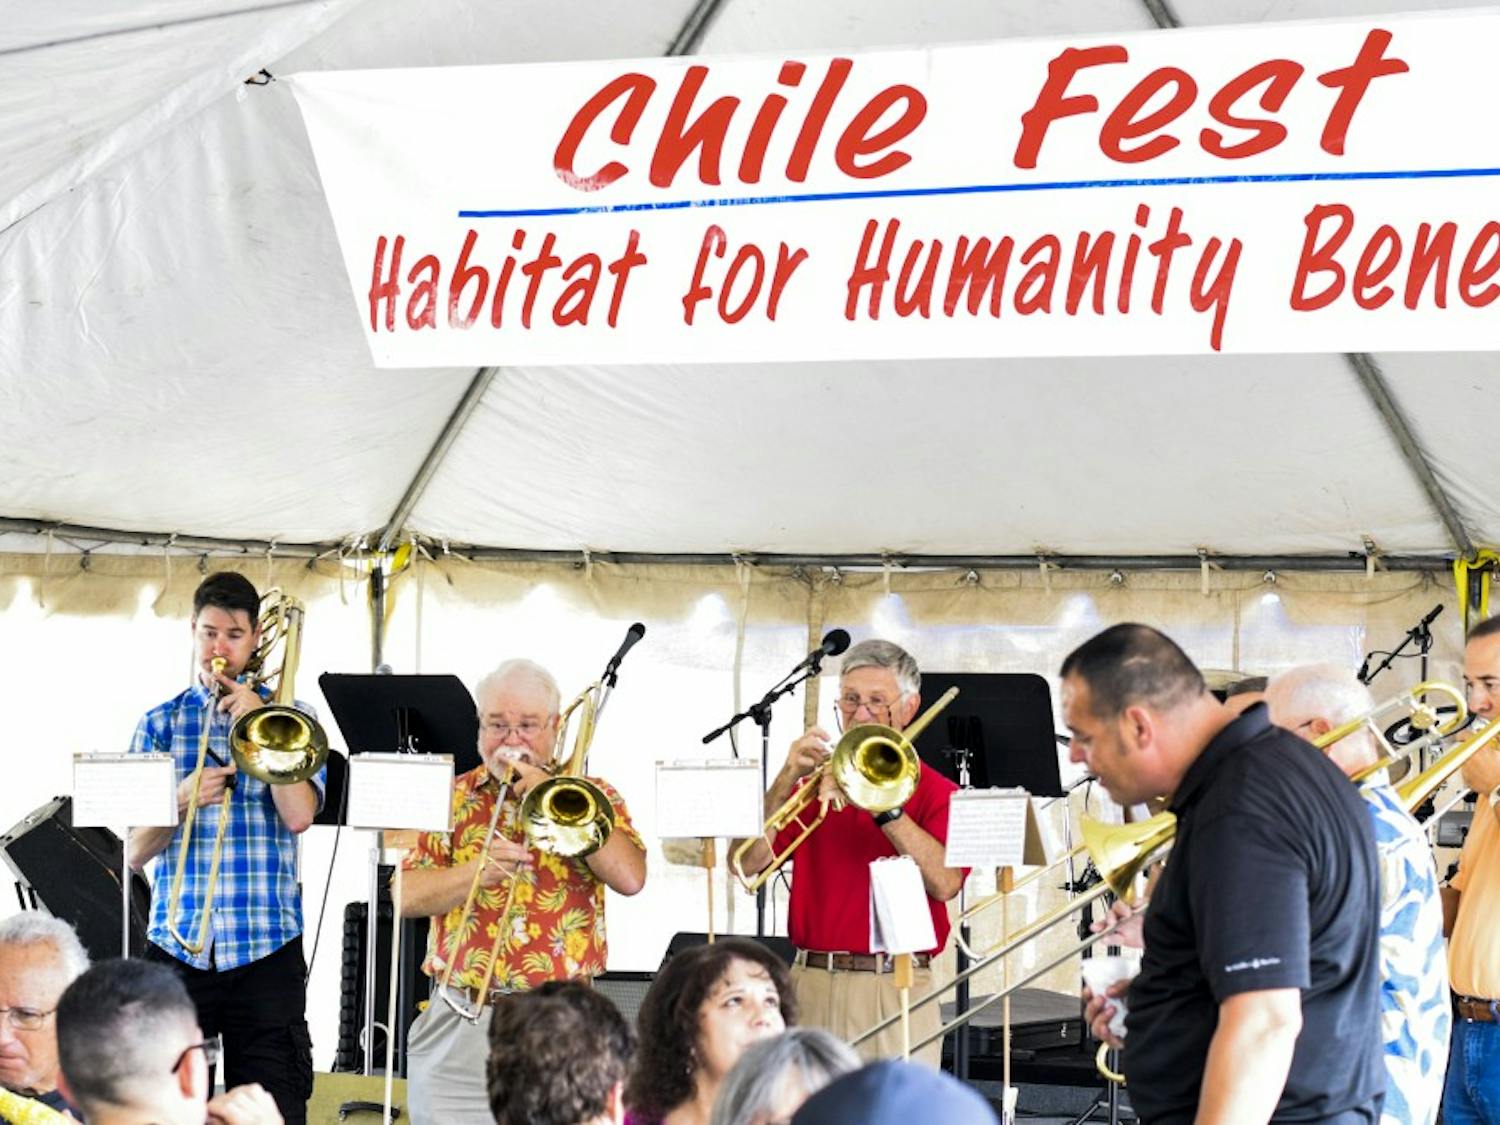 Performer take the stage during&nbsp;the 2016 annual Chile Fest Sunday August 28, 2016&nbsp;at Shepard of the Valley church. The festival was organized to raise funding for Habitat for Humanity.&nbsp;